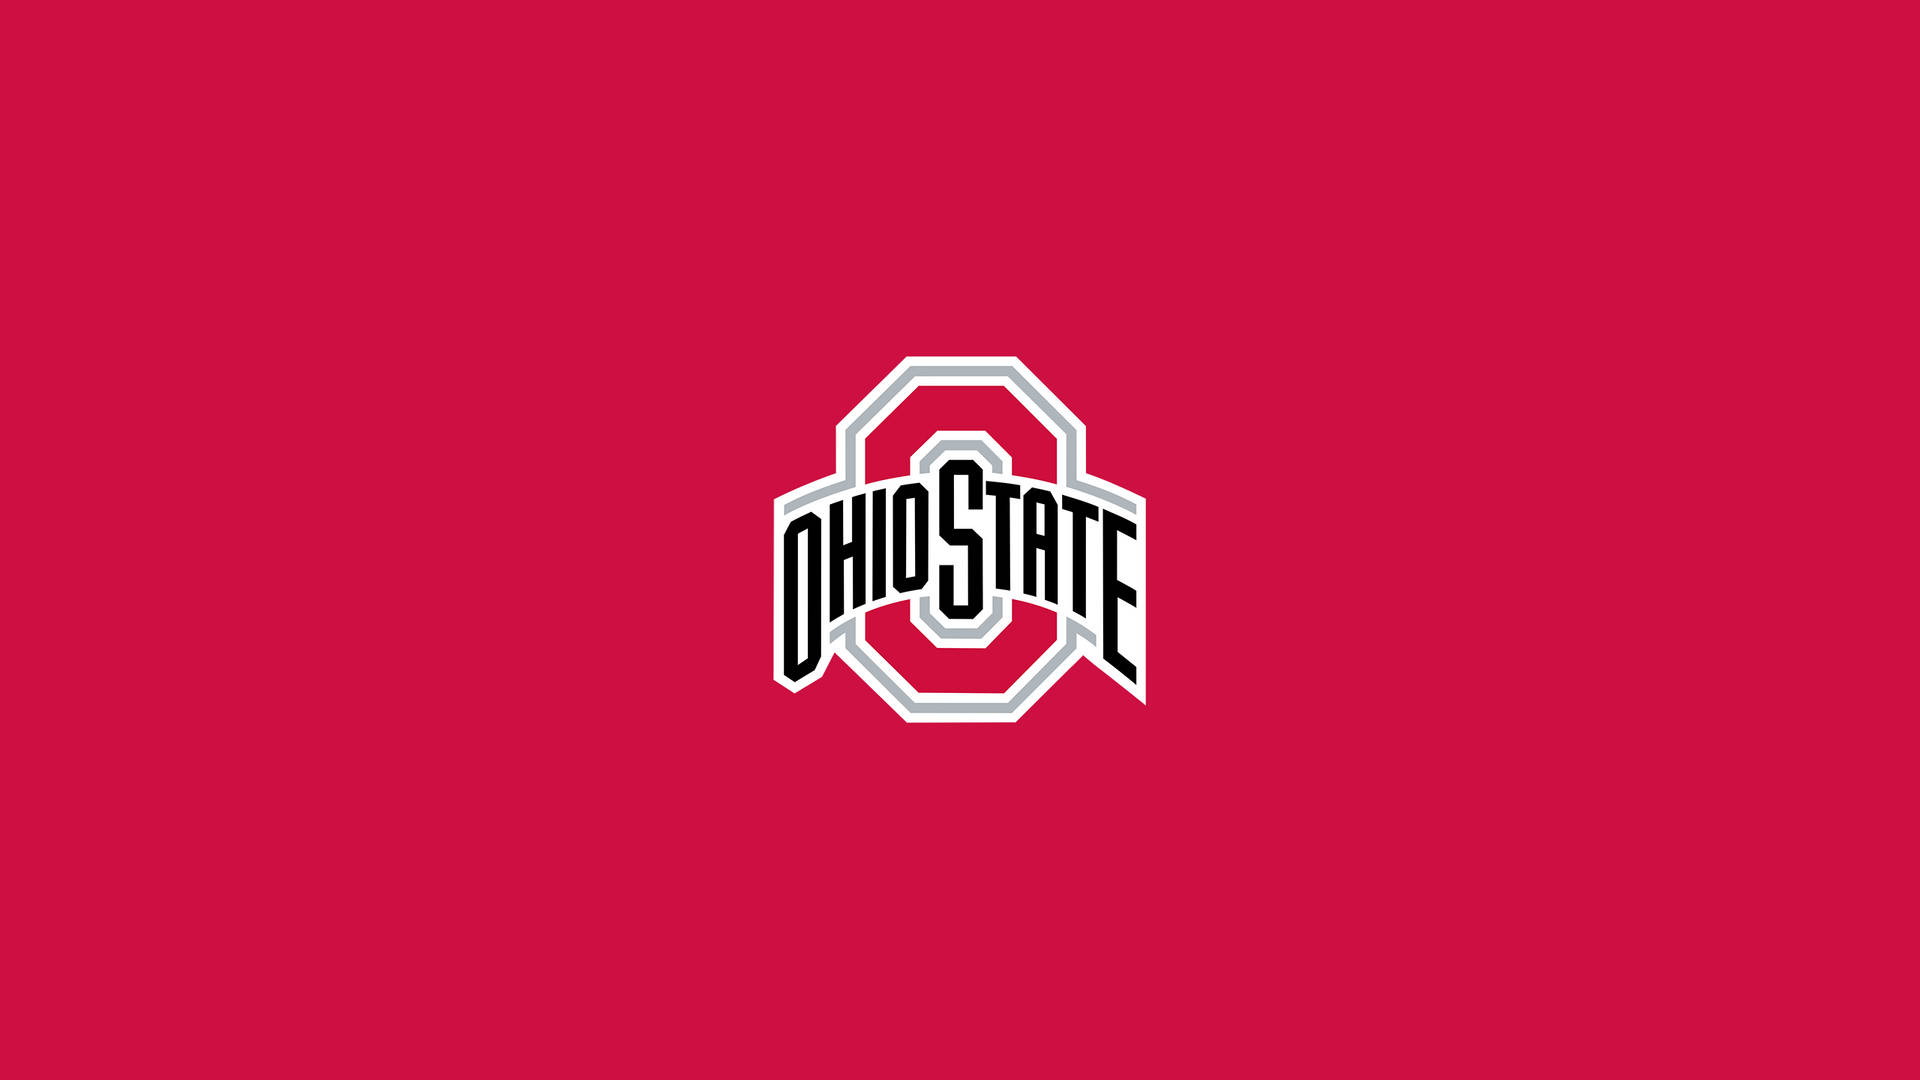 Ohio State University Plain Red Picture